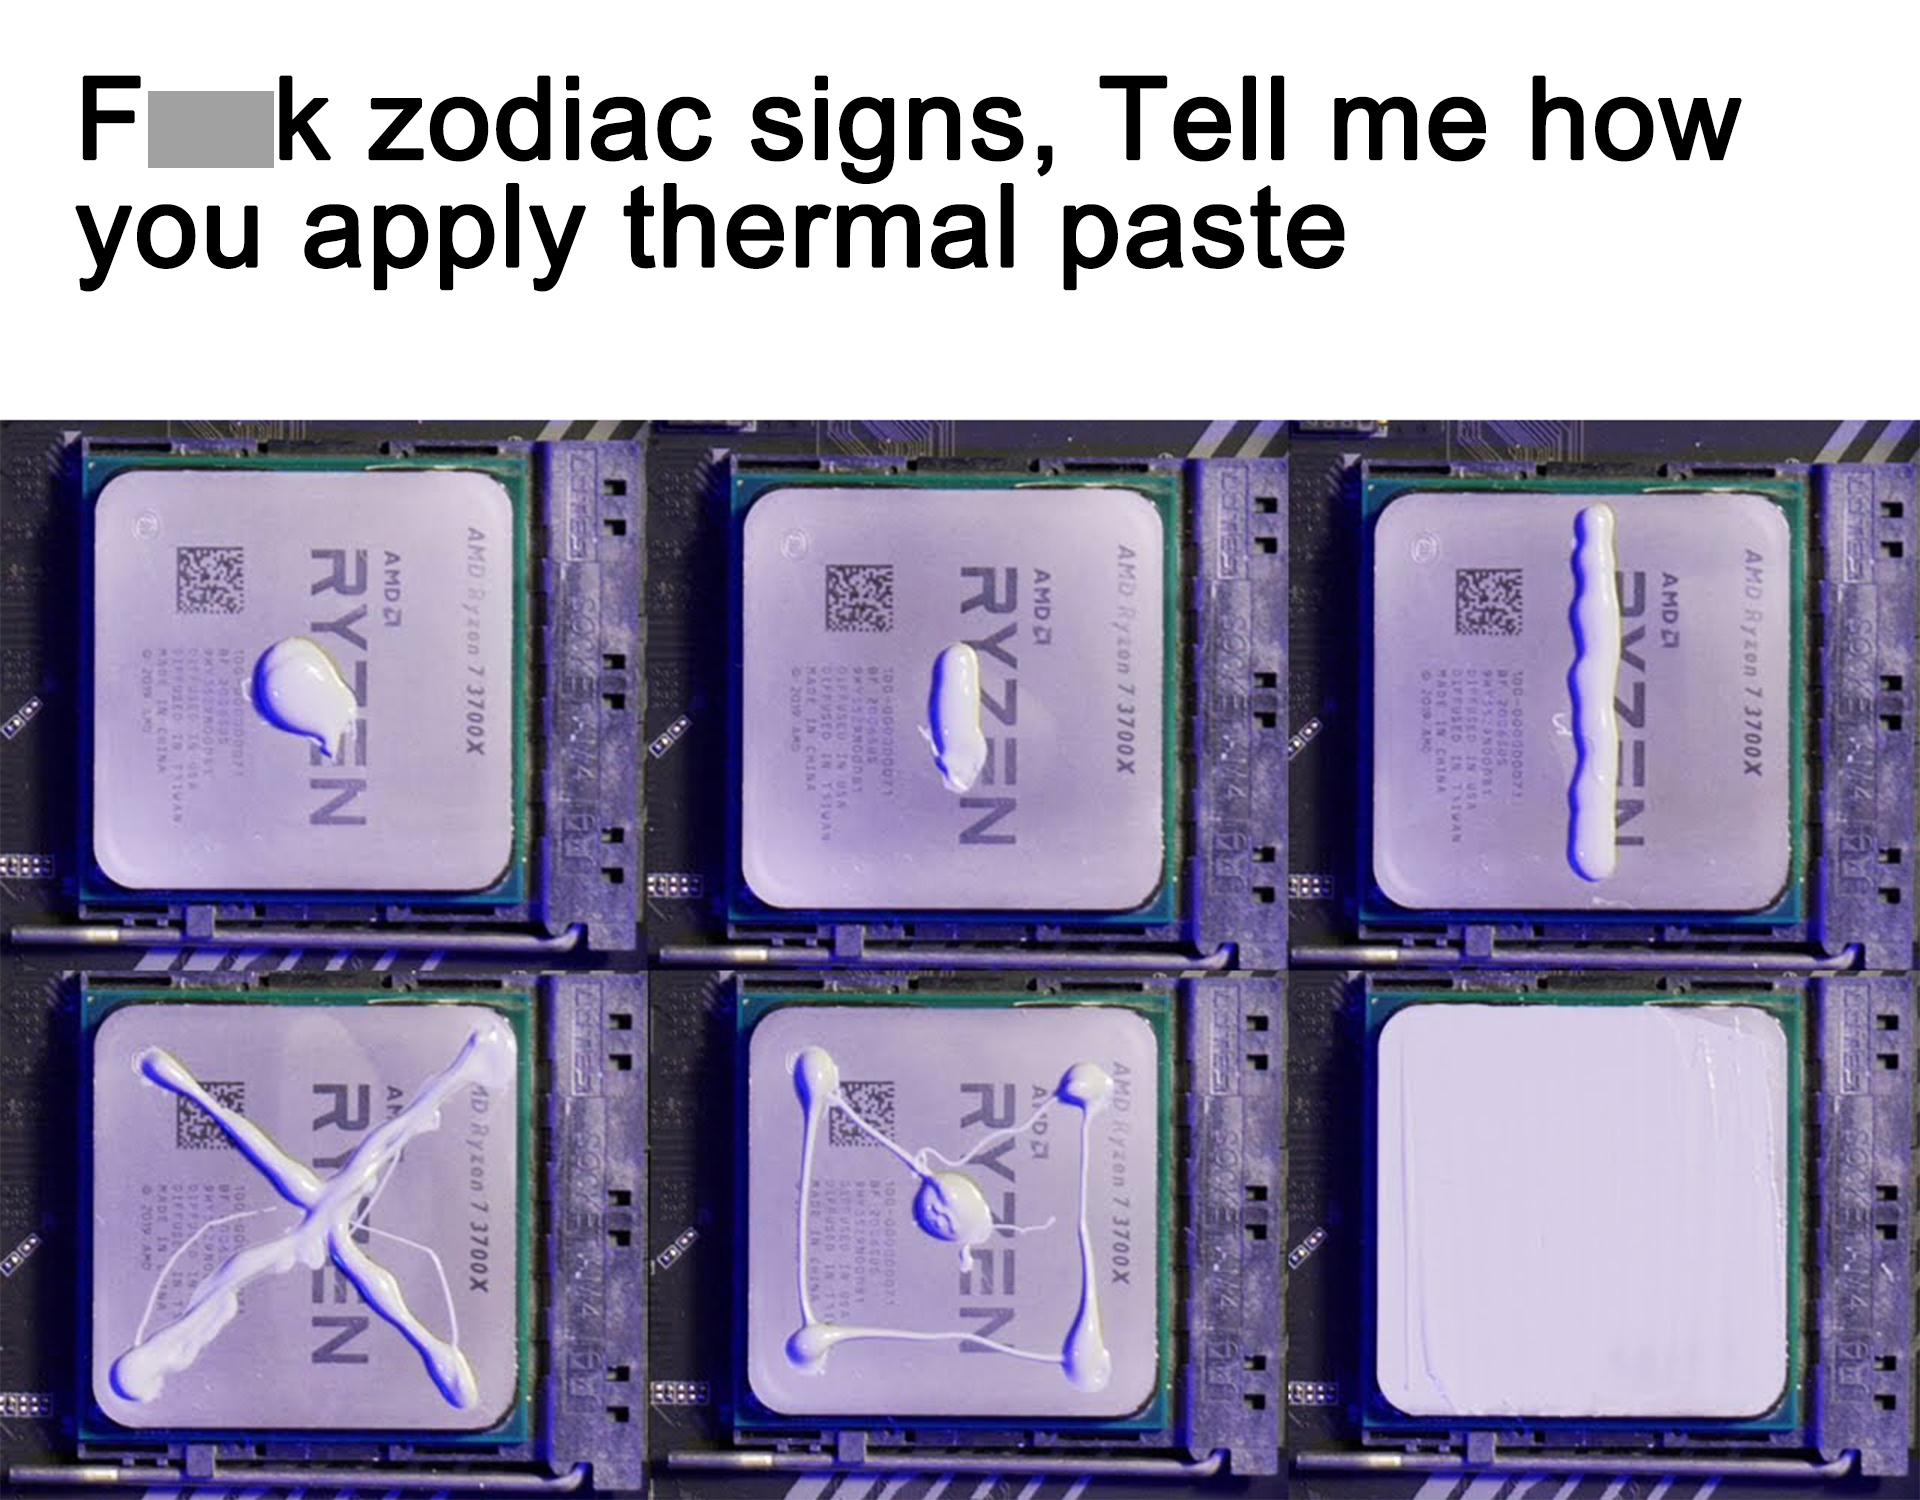 funny gaming memes - apply thermal paste - Rp Yax Ai Is 3700X tox Ahd Al Ryzen Ryzem F k zodiac signs, Tell me how you apply thermal paste Fle 473700X Ad Joox And Ryzen Ran 12